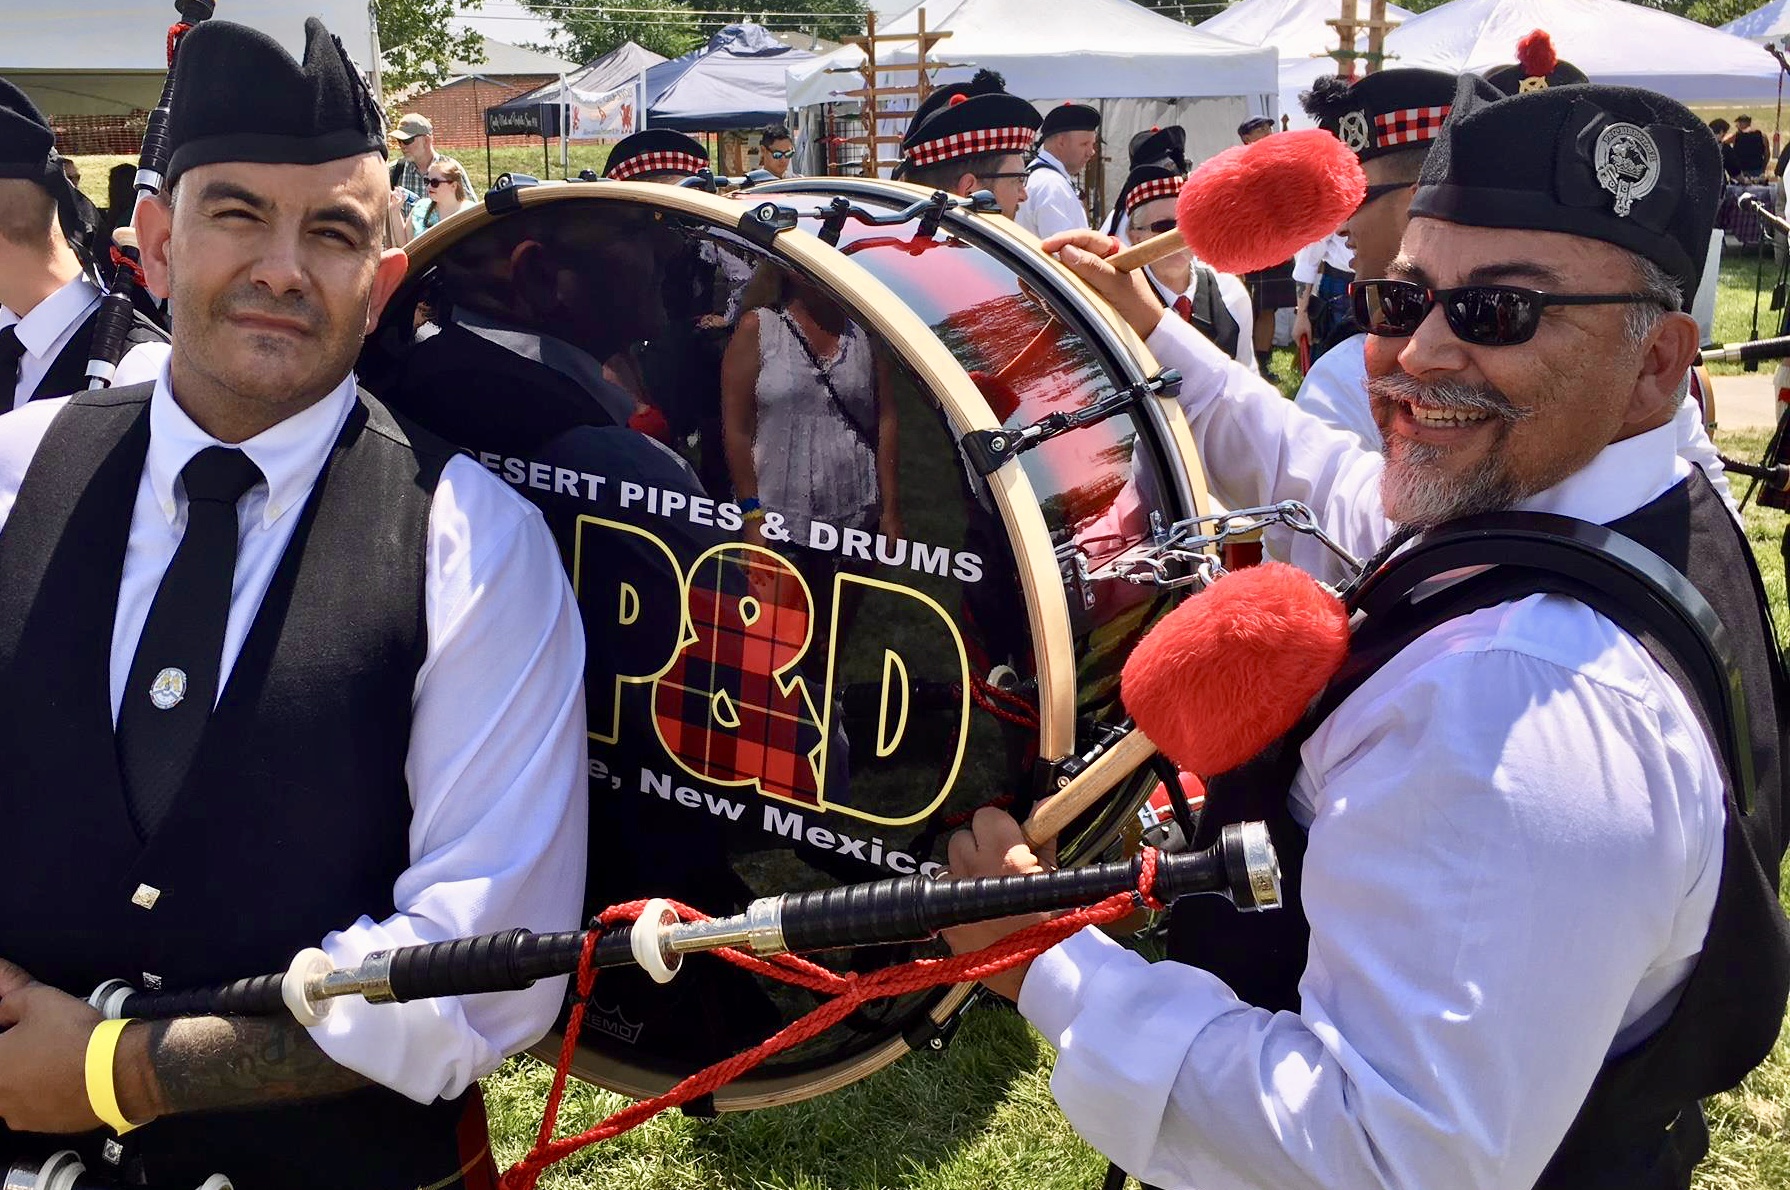 Members of High Desert Pipes and Drums